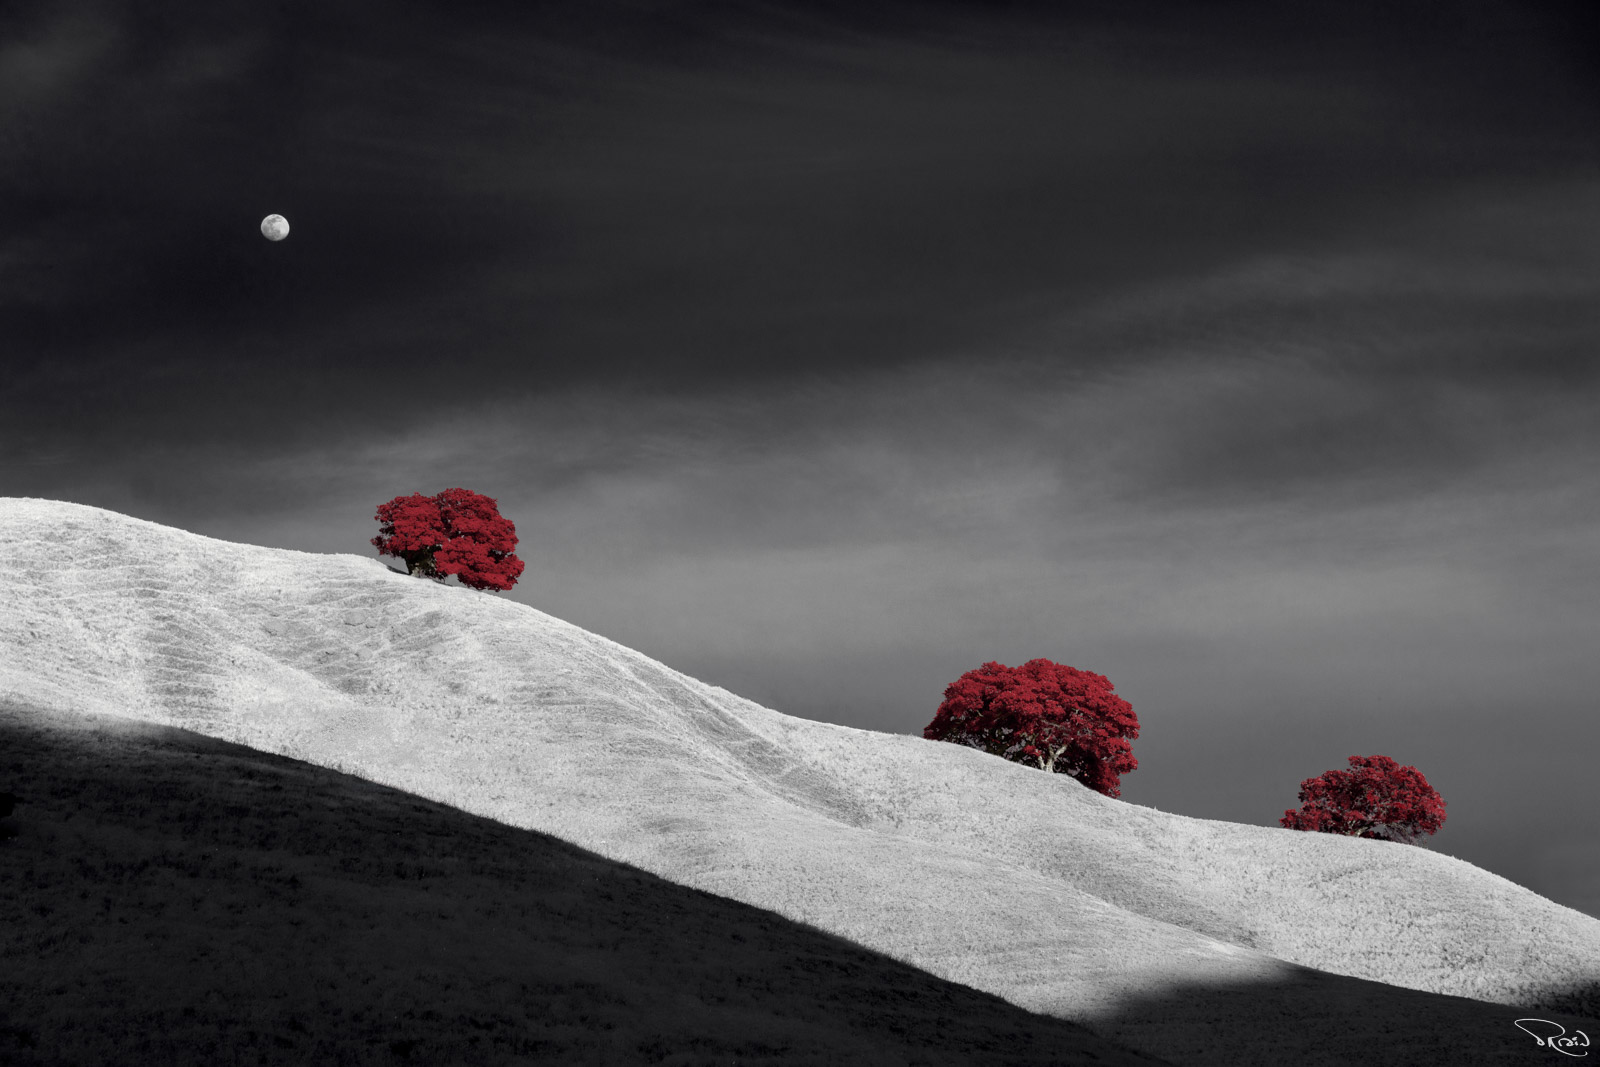 A full moon rises over three red oak trees atop a diagonal ridgeline in late-day shadow.